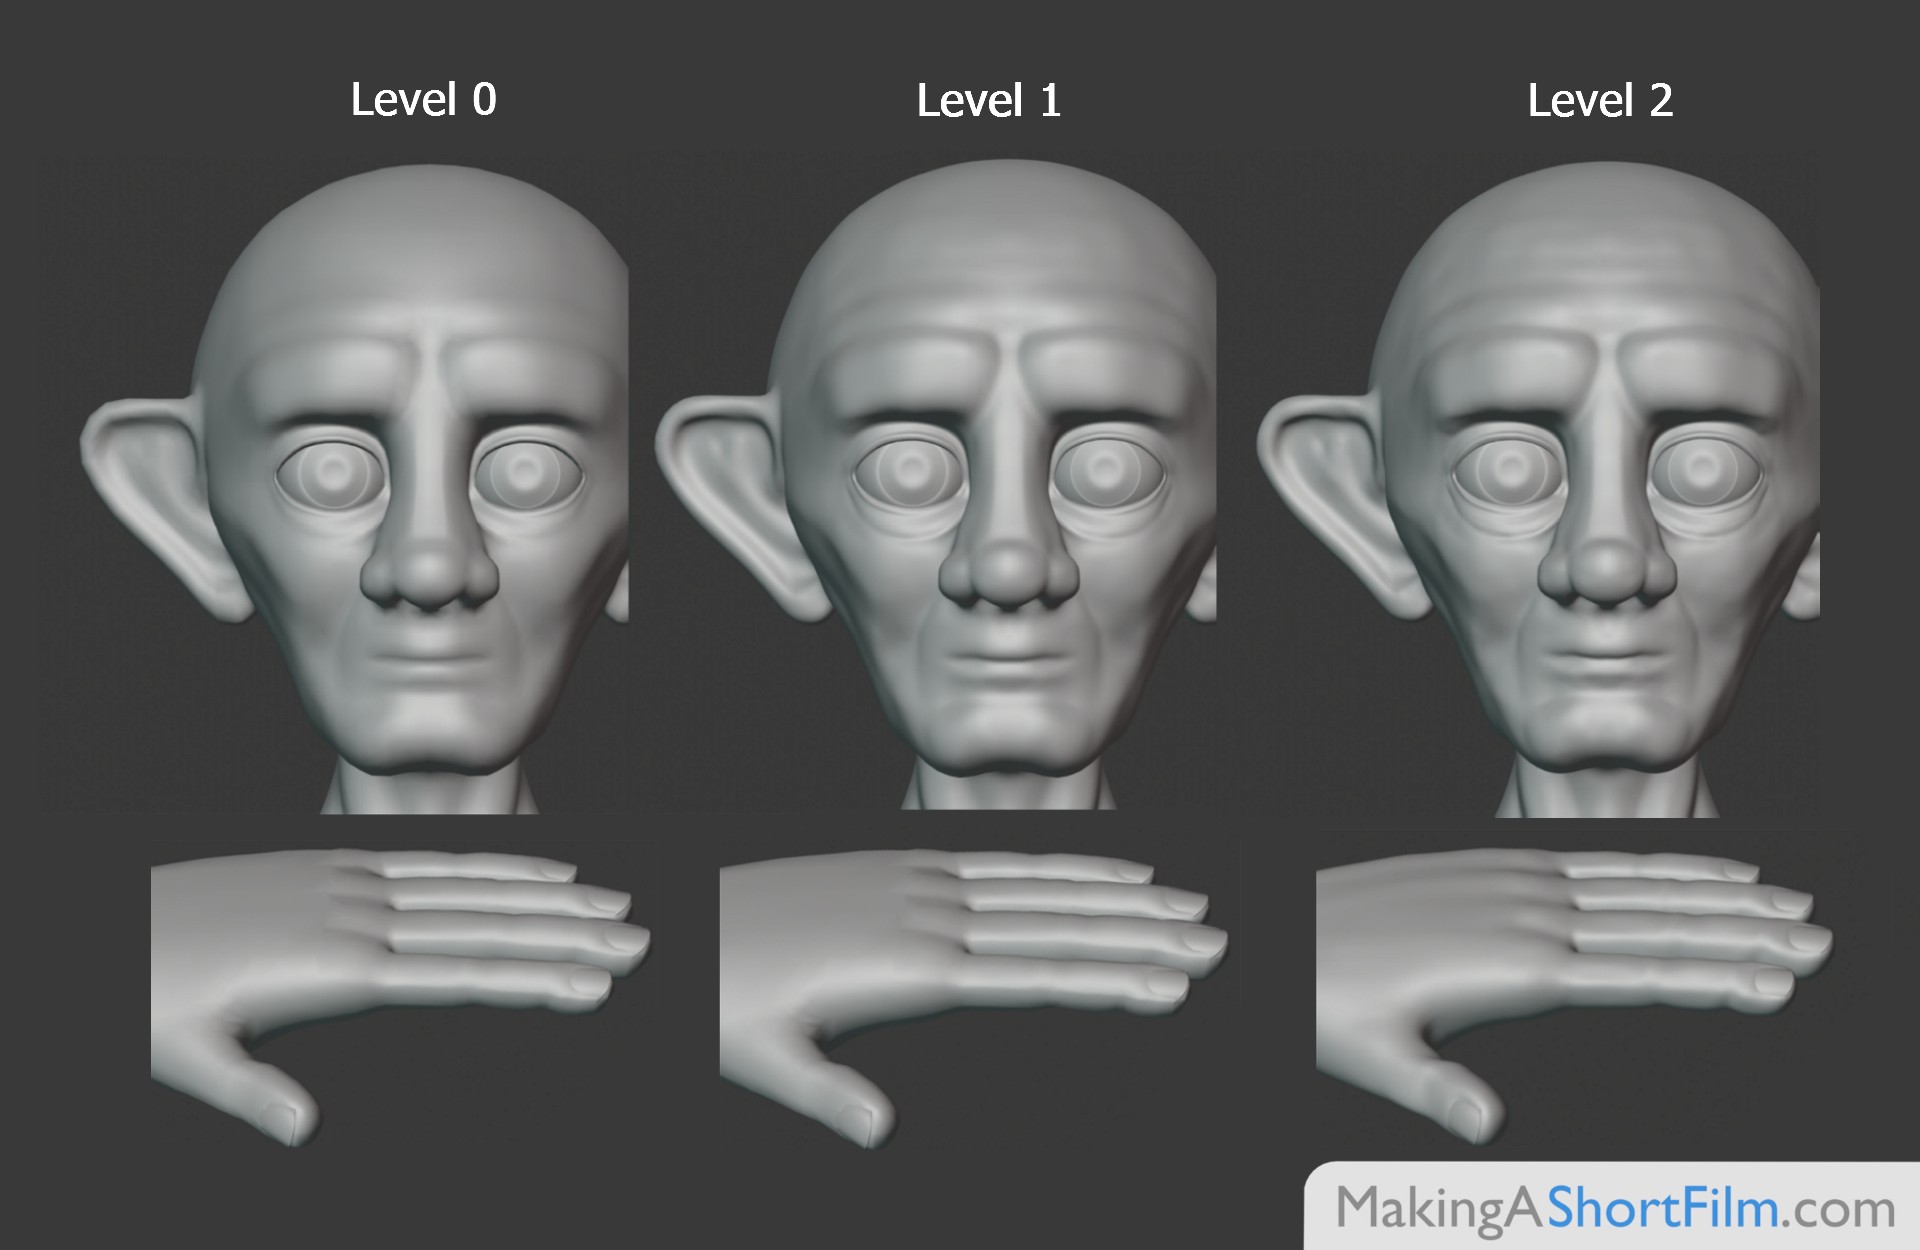 The different detail levels of the Old Man